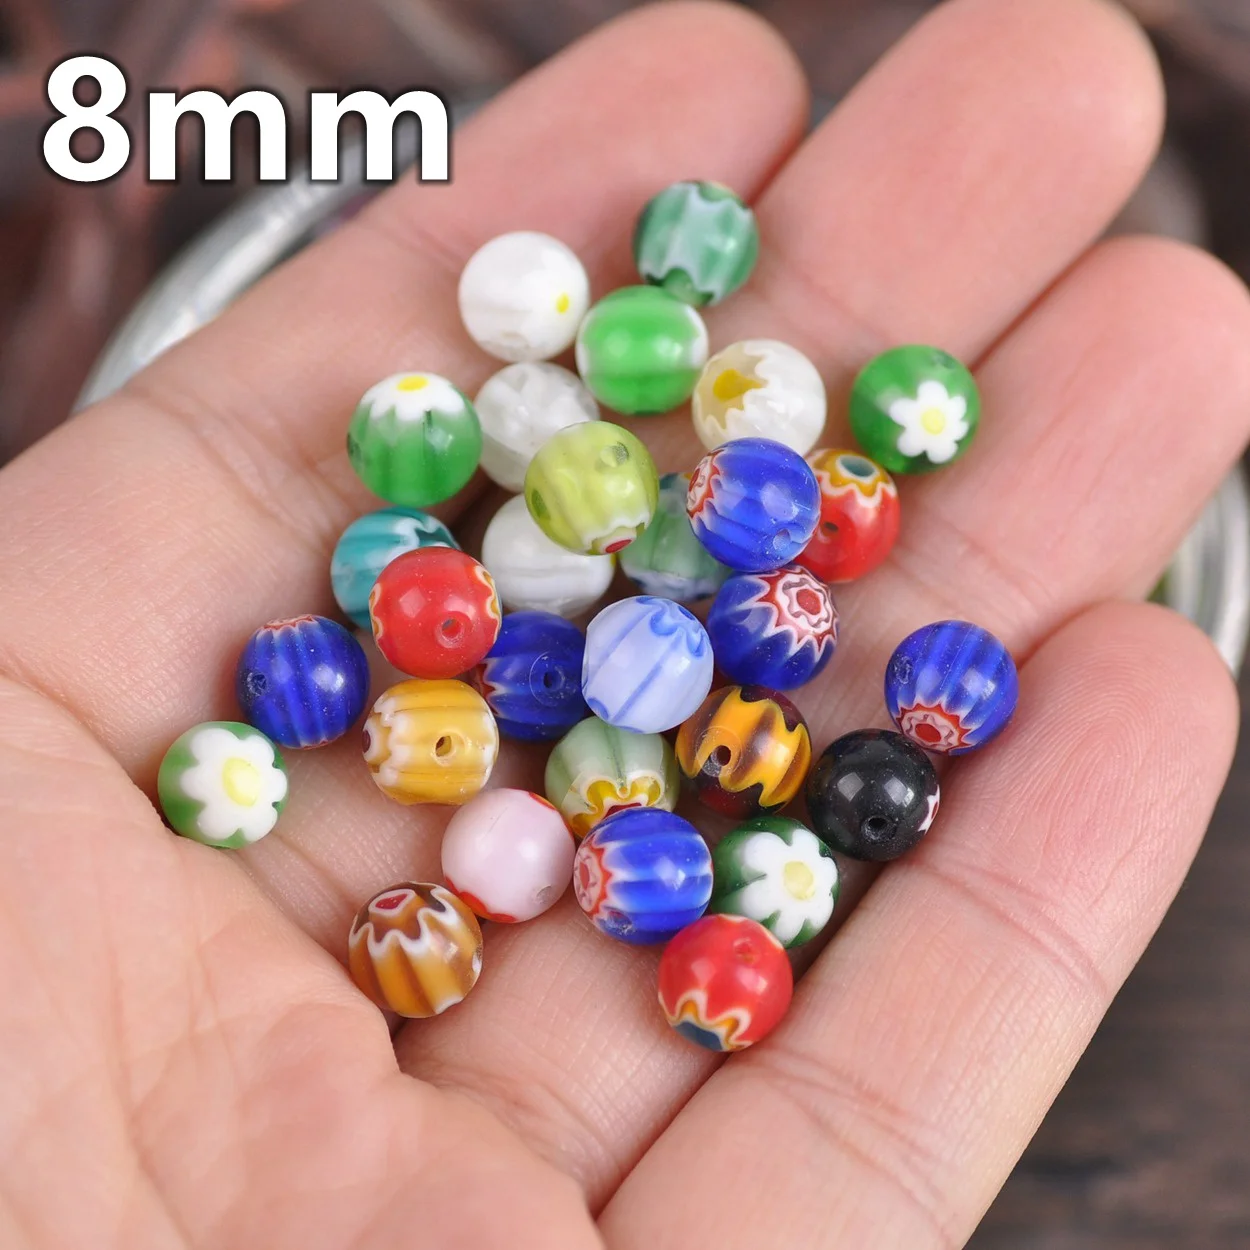 6mm 8mm 20pcs Round Millefiori Flower Lampwork Glass Spacer Loose Beads Jewelry